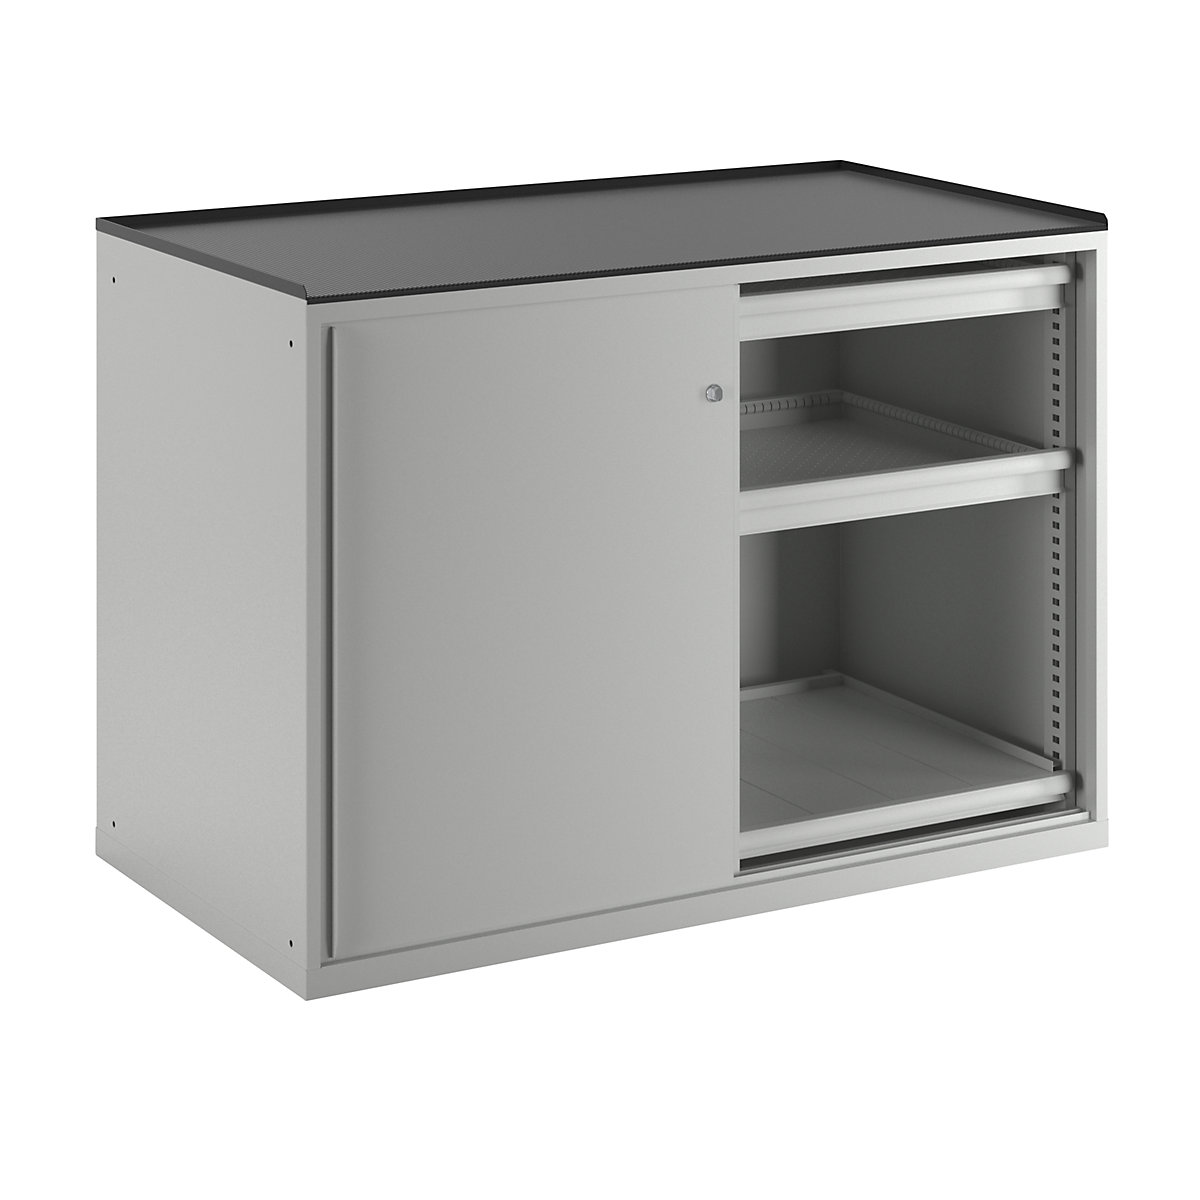 Sliding door cupboard, max. load of pull-out shelf 75 kg – LISTA, 4 drawers, 2 pull-out shelves, light grey-2